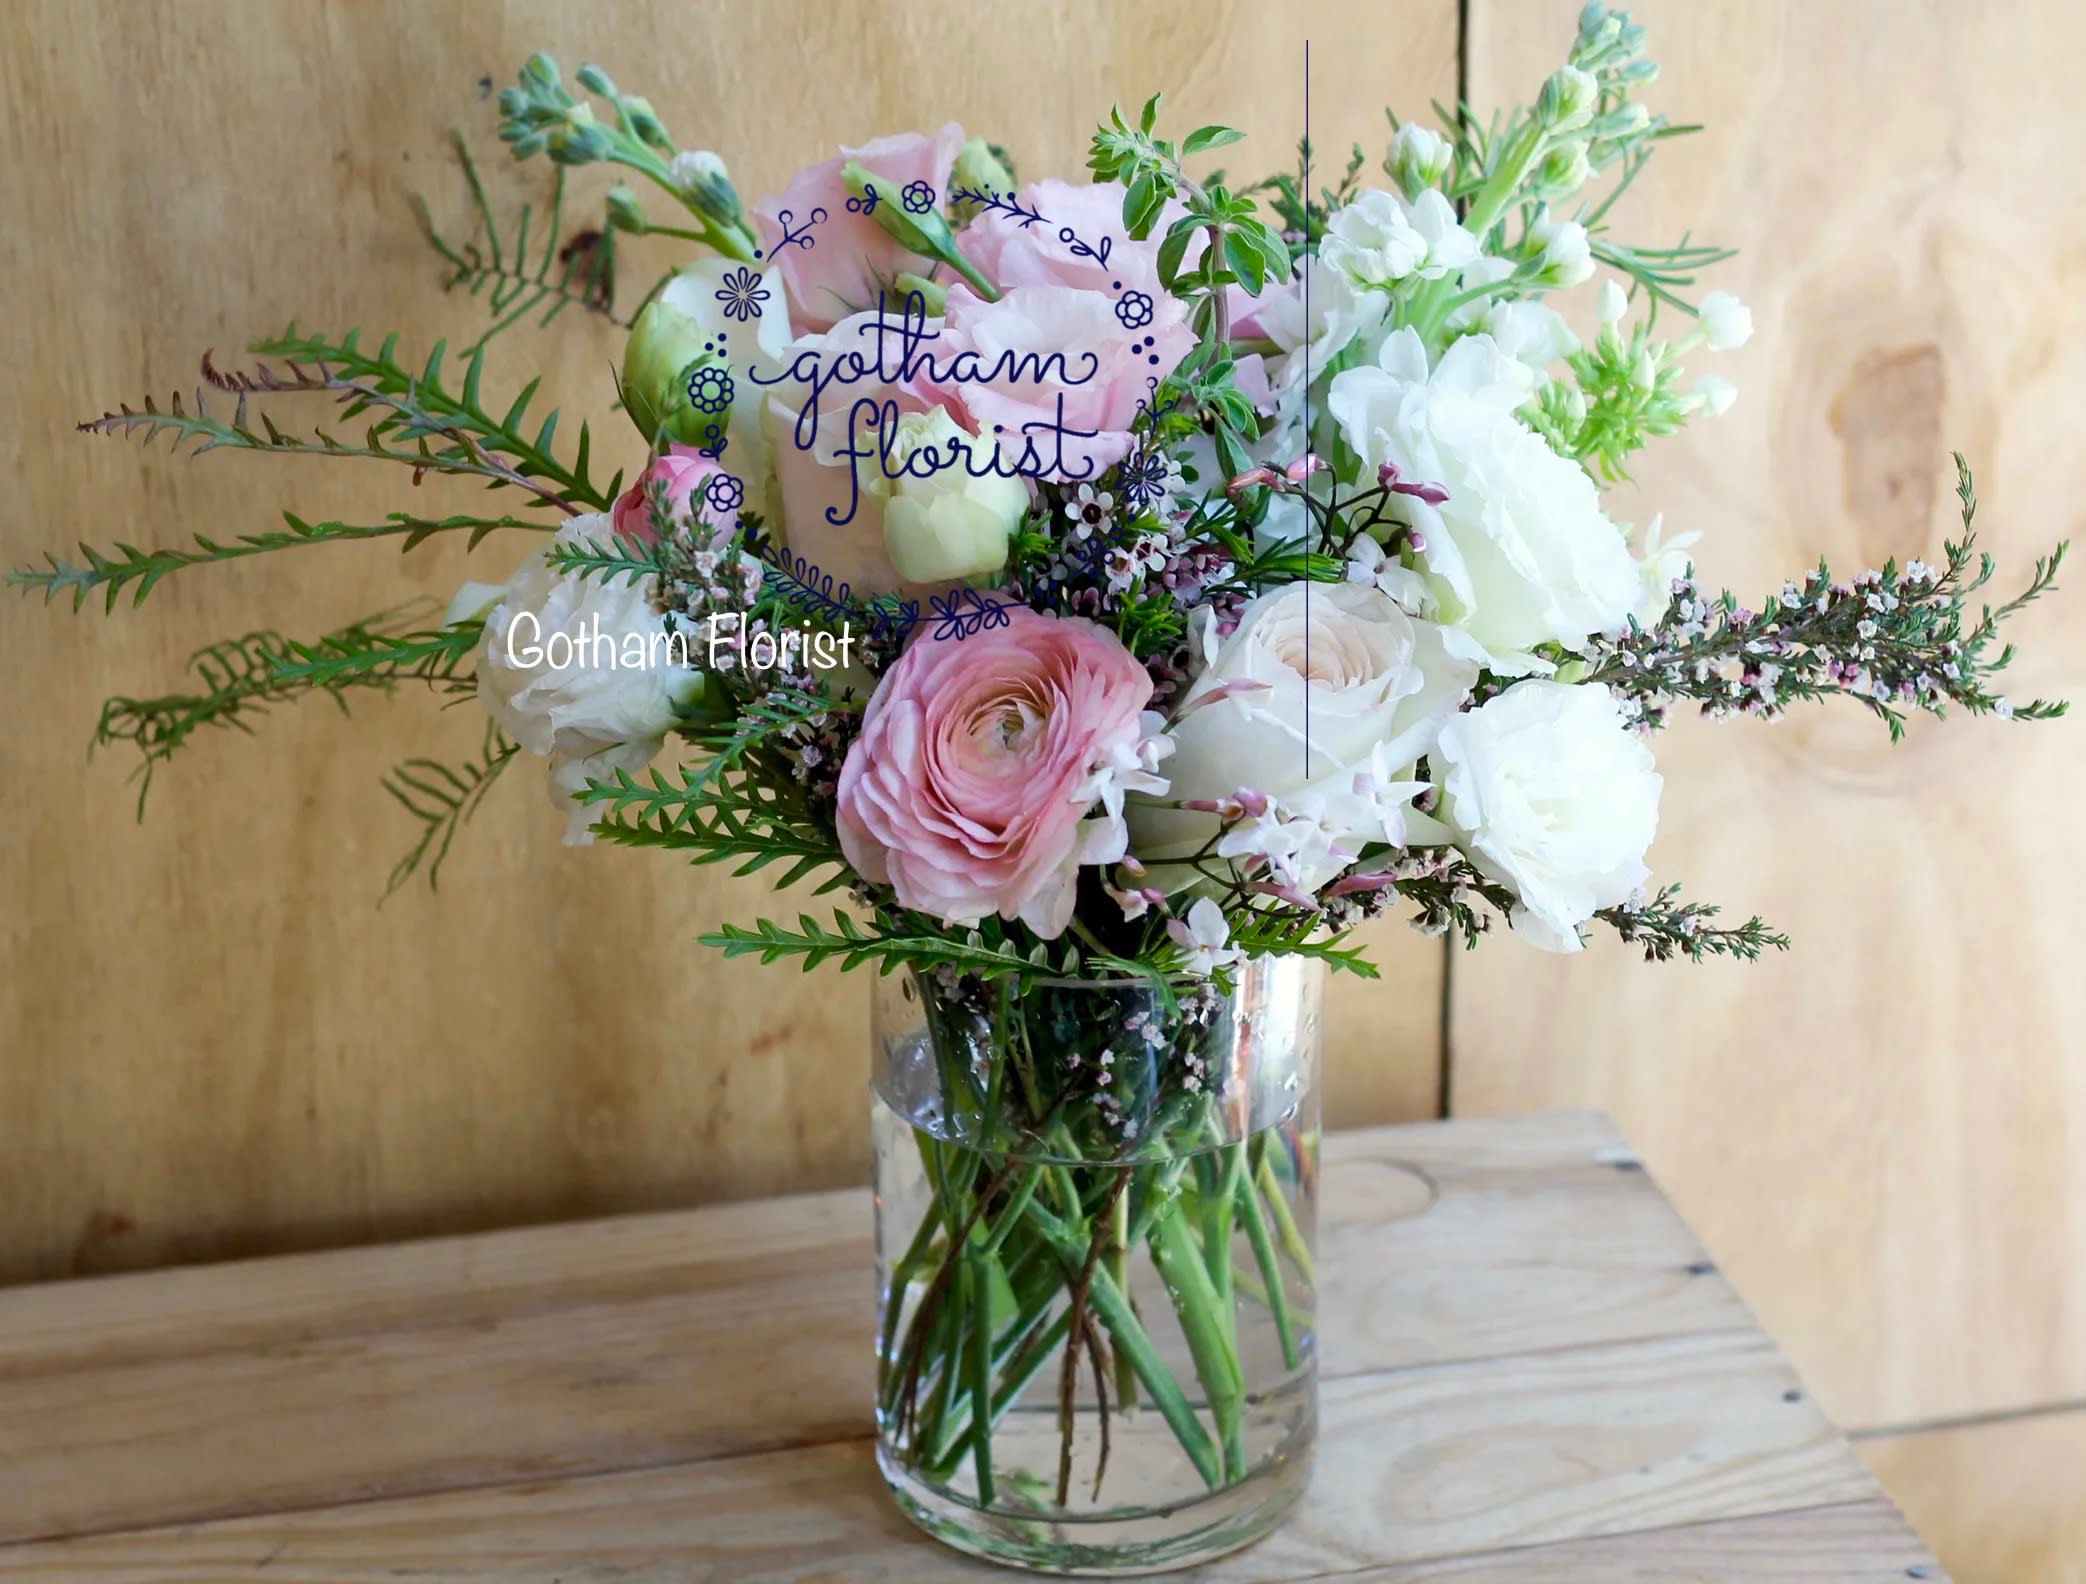 La Boheme - Pink and white roses, lisianthus and seasonal foliage. Perfect mix of pretty flowers in a glass vase, perfect for a desk!  Send this popular design from the best #nyc florist. Send the best flowers from the best flower shop in New York. We offer same day flower delivery in Manhattan, Queens, Bronx, Brooklyn, Staten Island and West Chester counties. We have the prettiest and most luxurious flowers to choose from and our designs are unique and whimsical. We carry Peonies almost every day of the year!! #bestflorist #manhattan #newyork #bestflorist #samedaydelivery #nycflorist #ranunculus #blushflowers #flowerdelivery